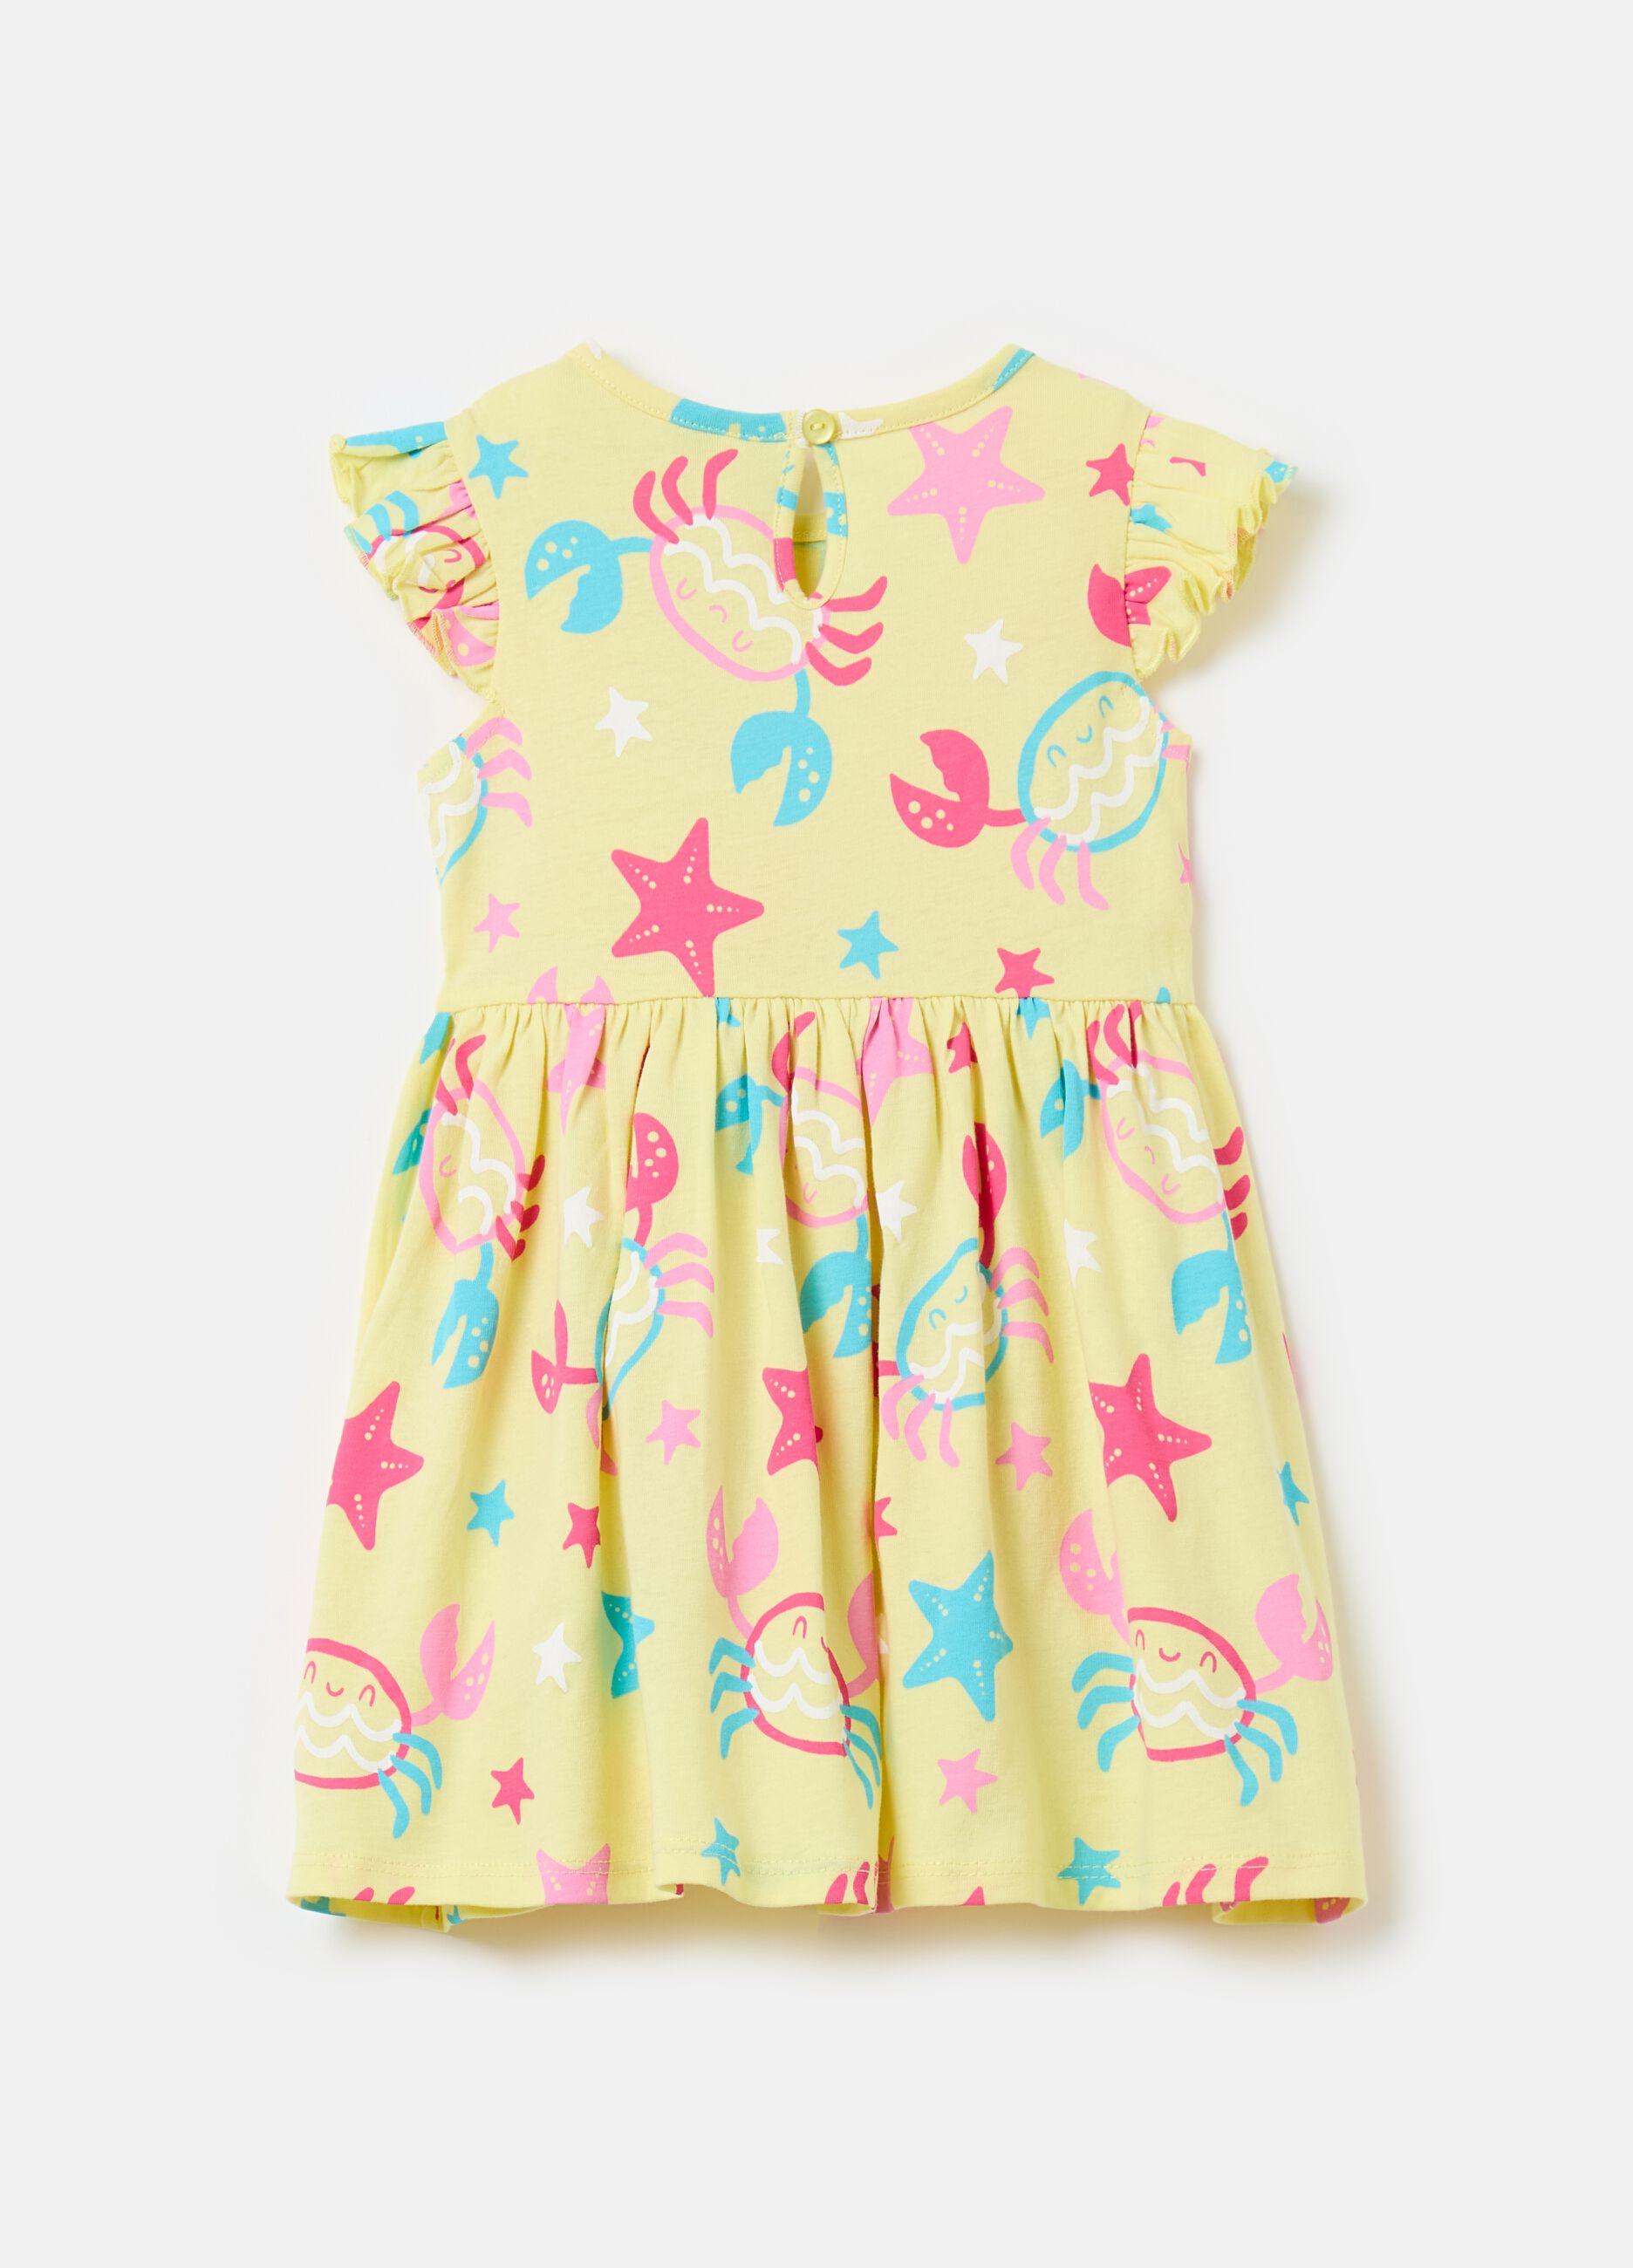 100% cotton jersey dress with small fish print